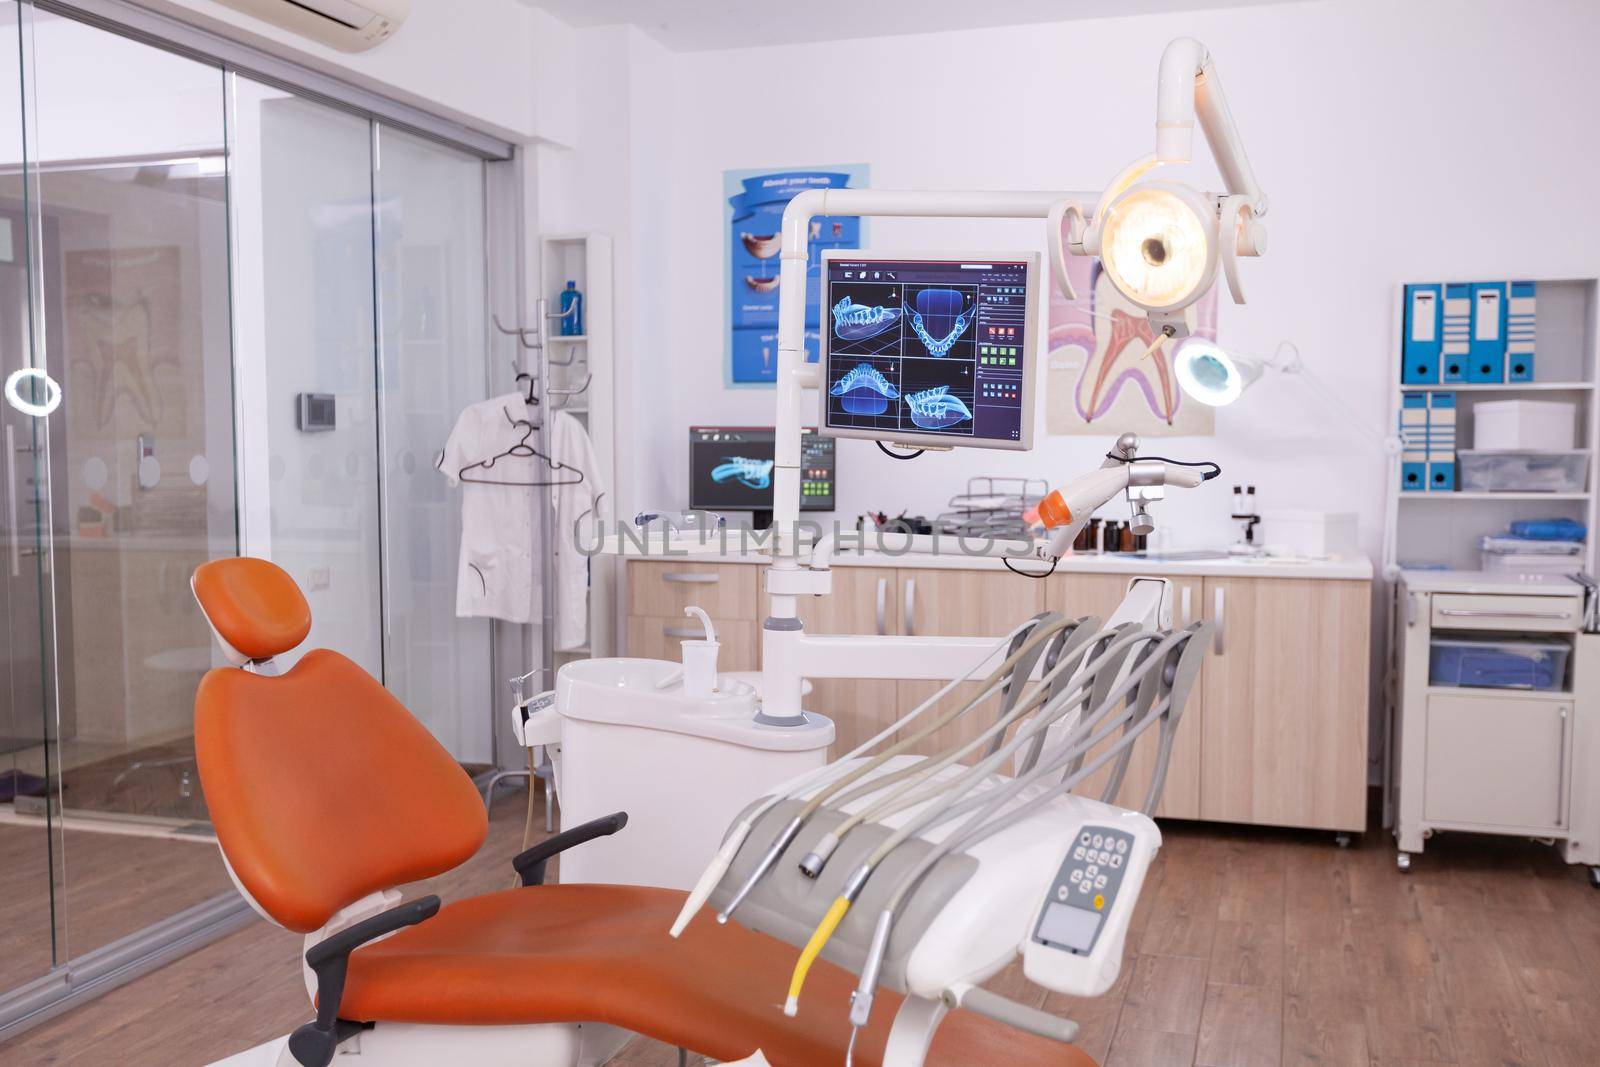 Empty medical clinic orthodontic hospital room with stomatology dental equipment, ready for dentistry surgery. Orthodontist chair with nobody on it, teeth diagnosis radiography images on display